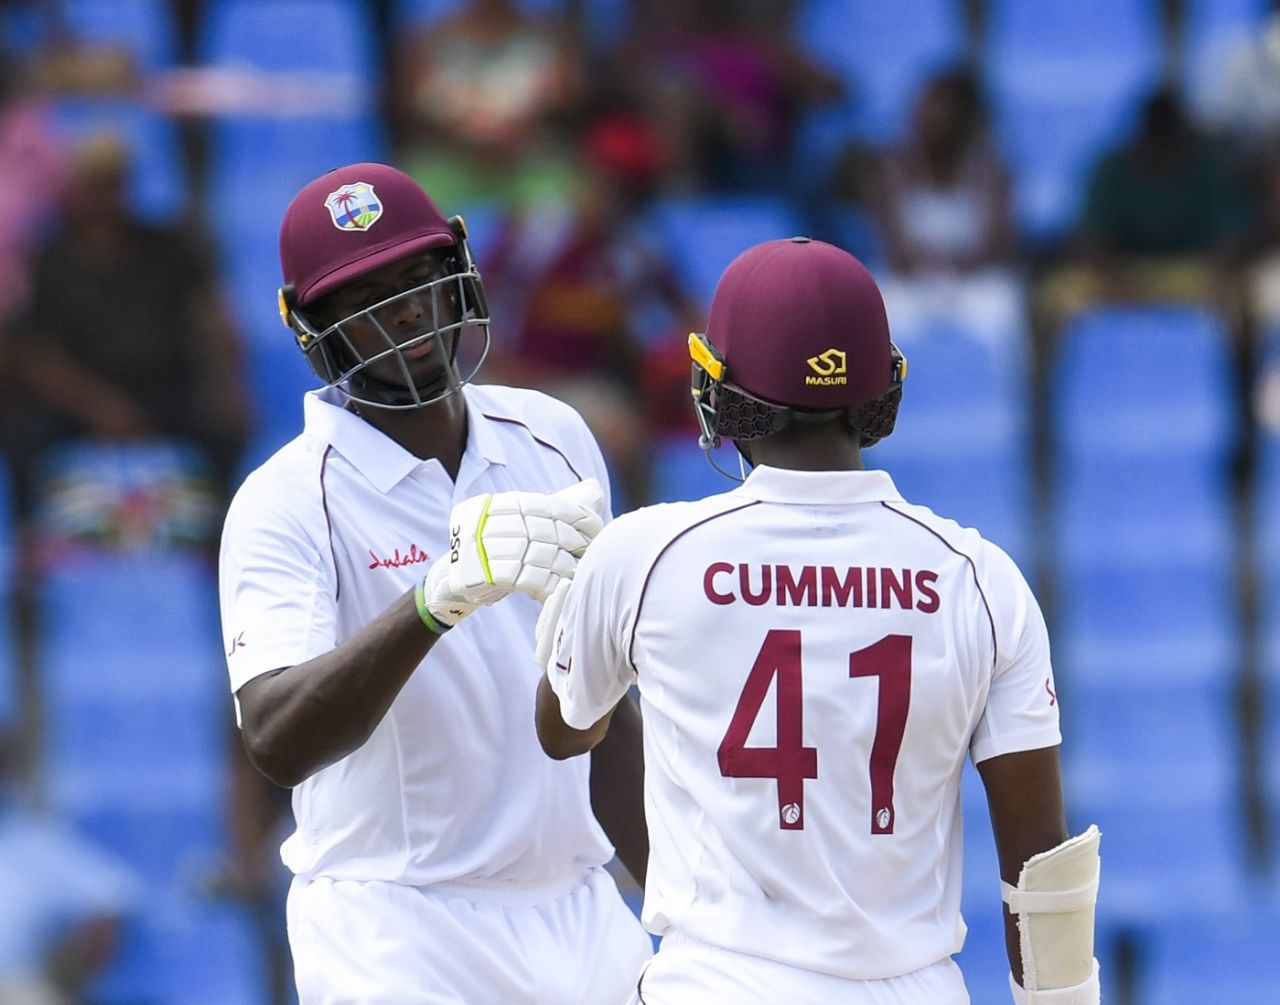 Jason Holder and Miguel Cummins frustrated India for nearly 18 overs, West Indies v India, 1st Test, North Sound, 3rd day, August 24, 2019